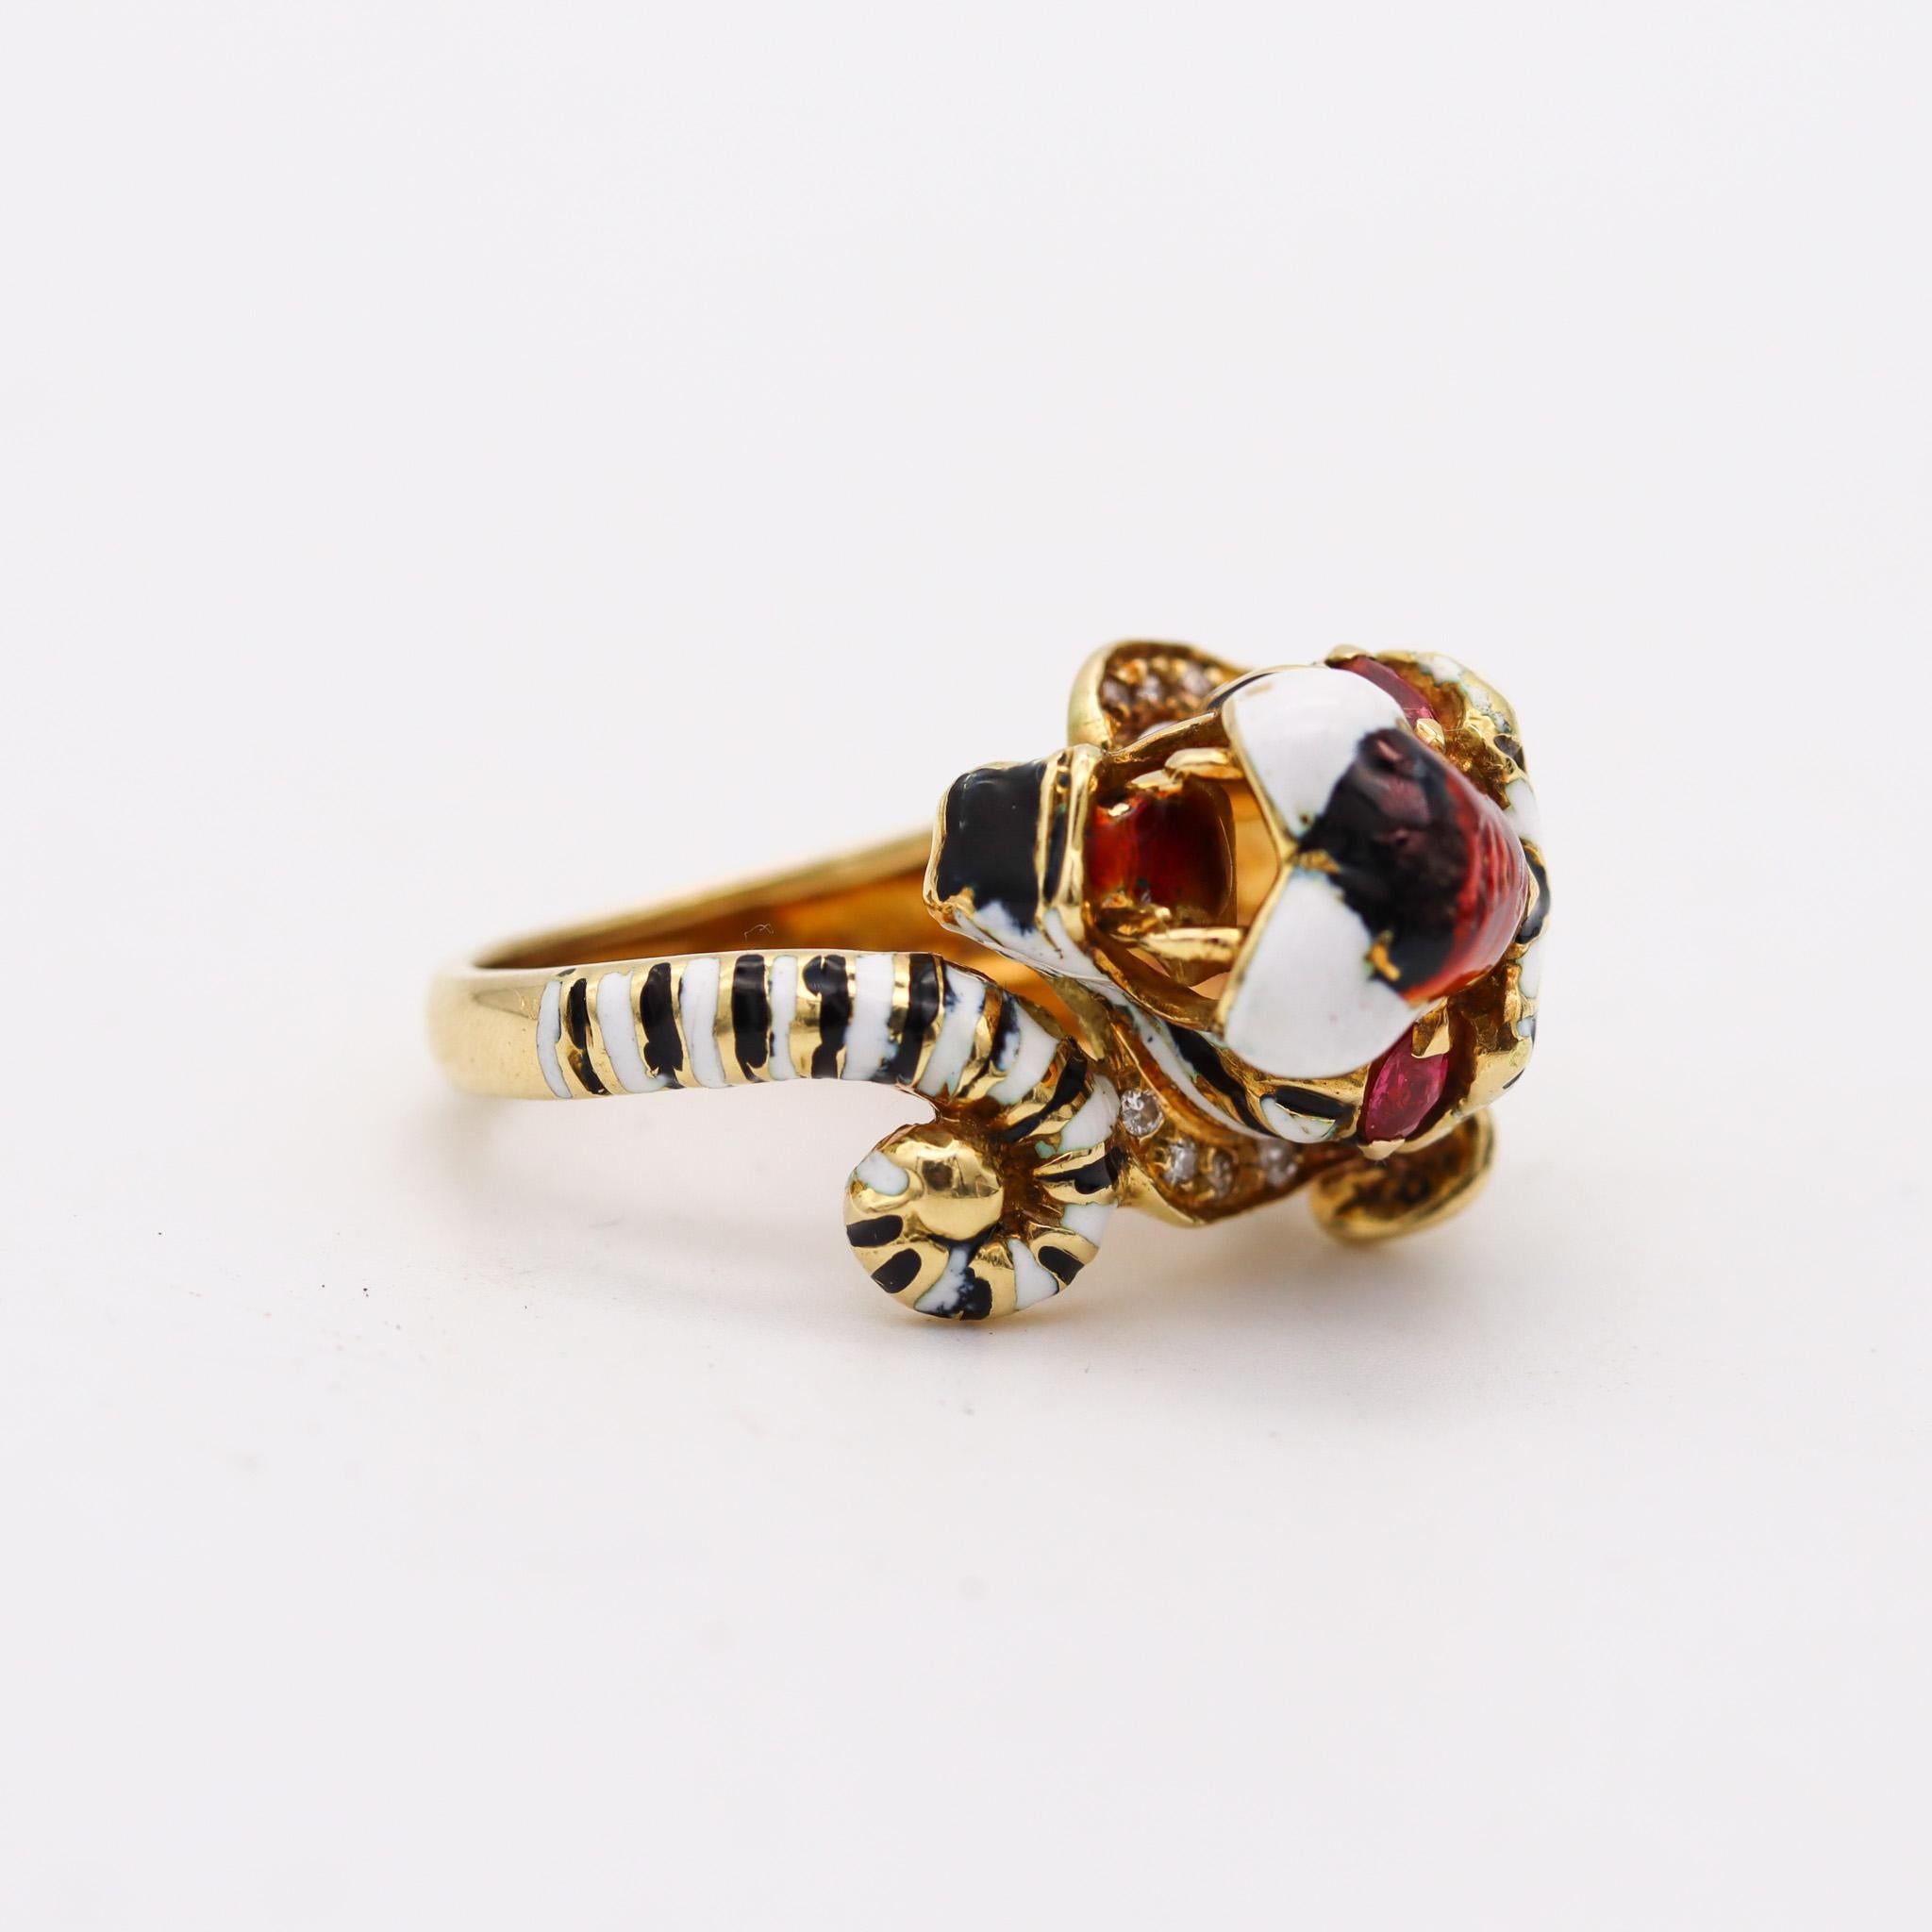 Retro Frascarolo Milano Enameled Tiger Cocktail Ring in 18Kt Gold Diamonds And Rubies For Sale